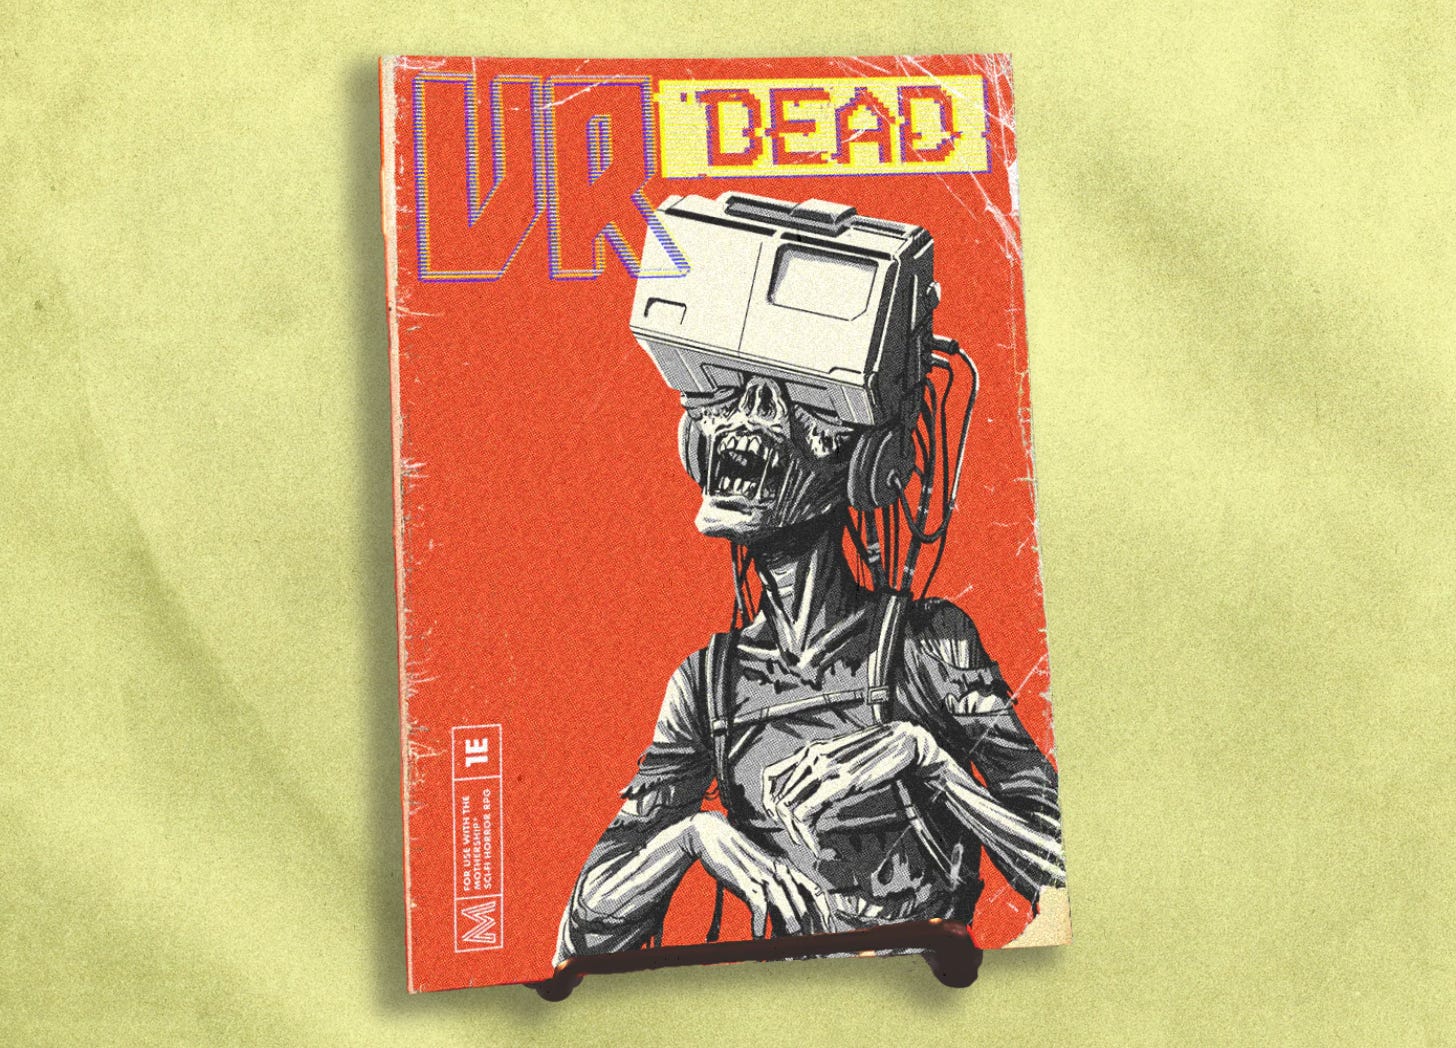 The cover of VR Dead, a “VR Zombie” has a massive headset on